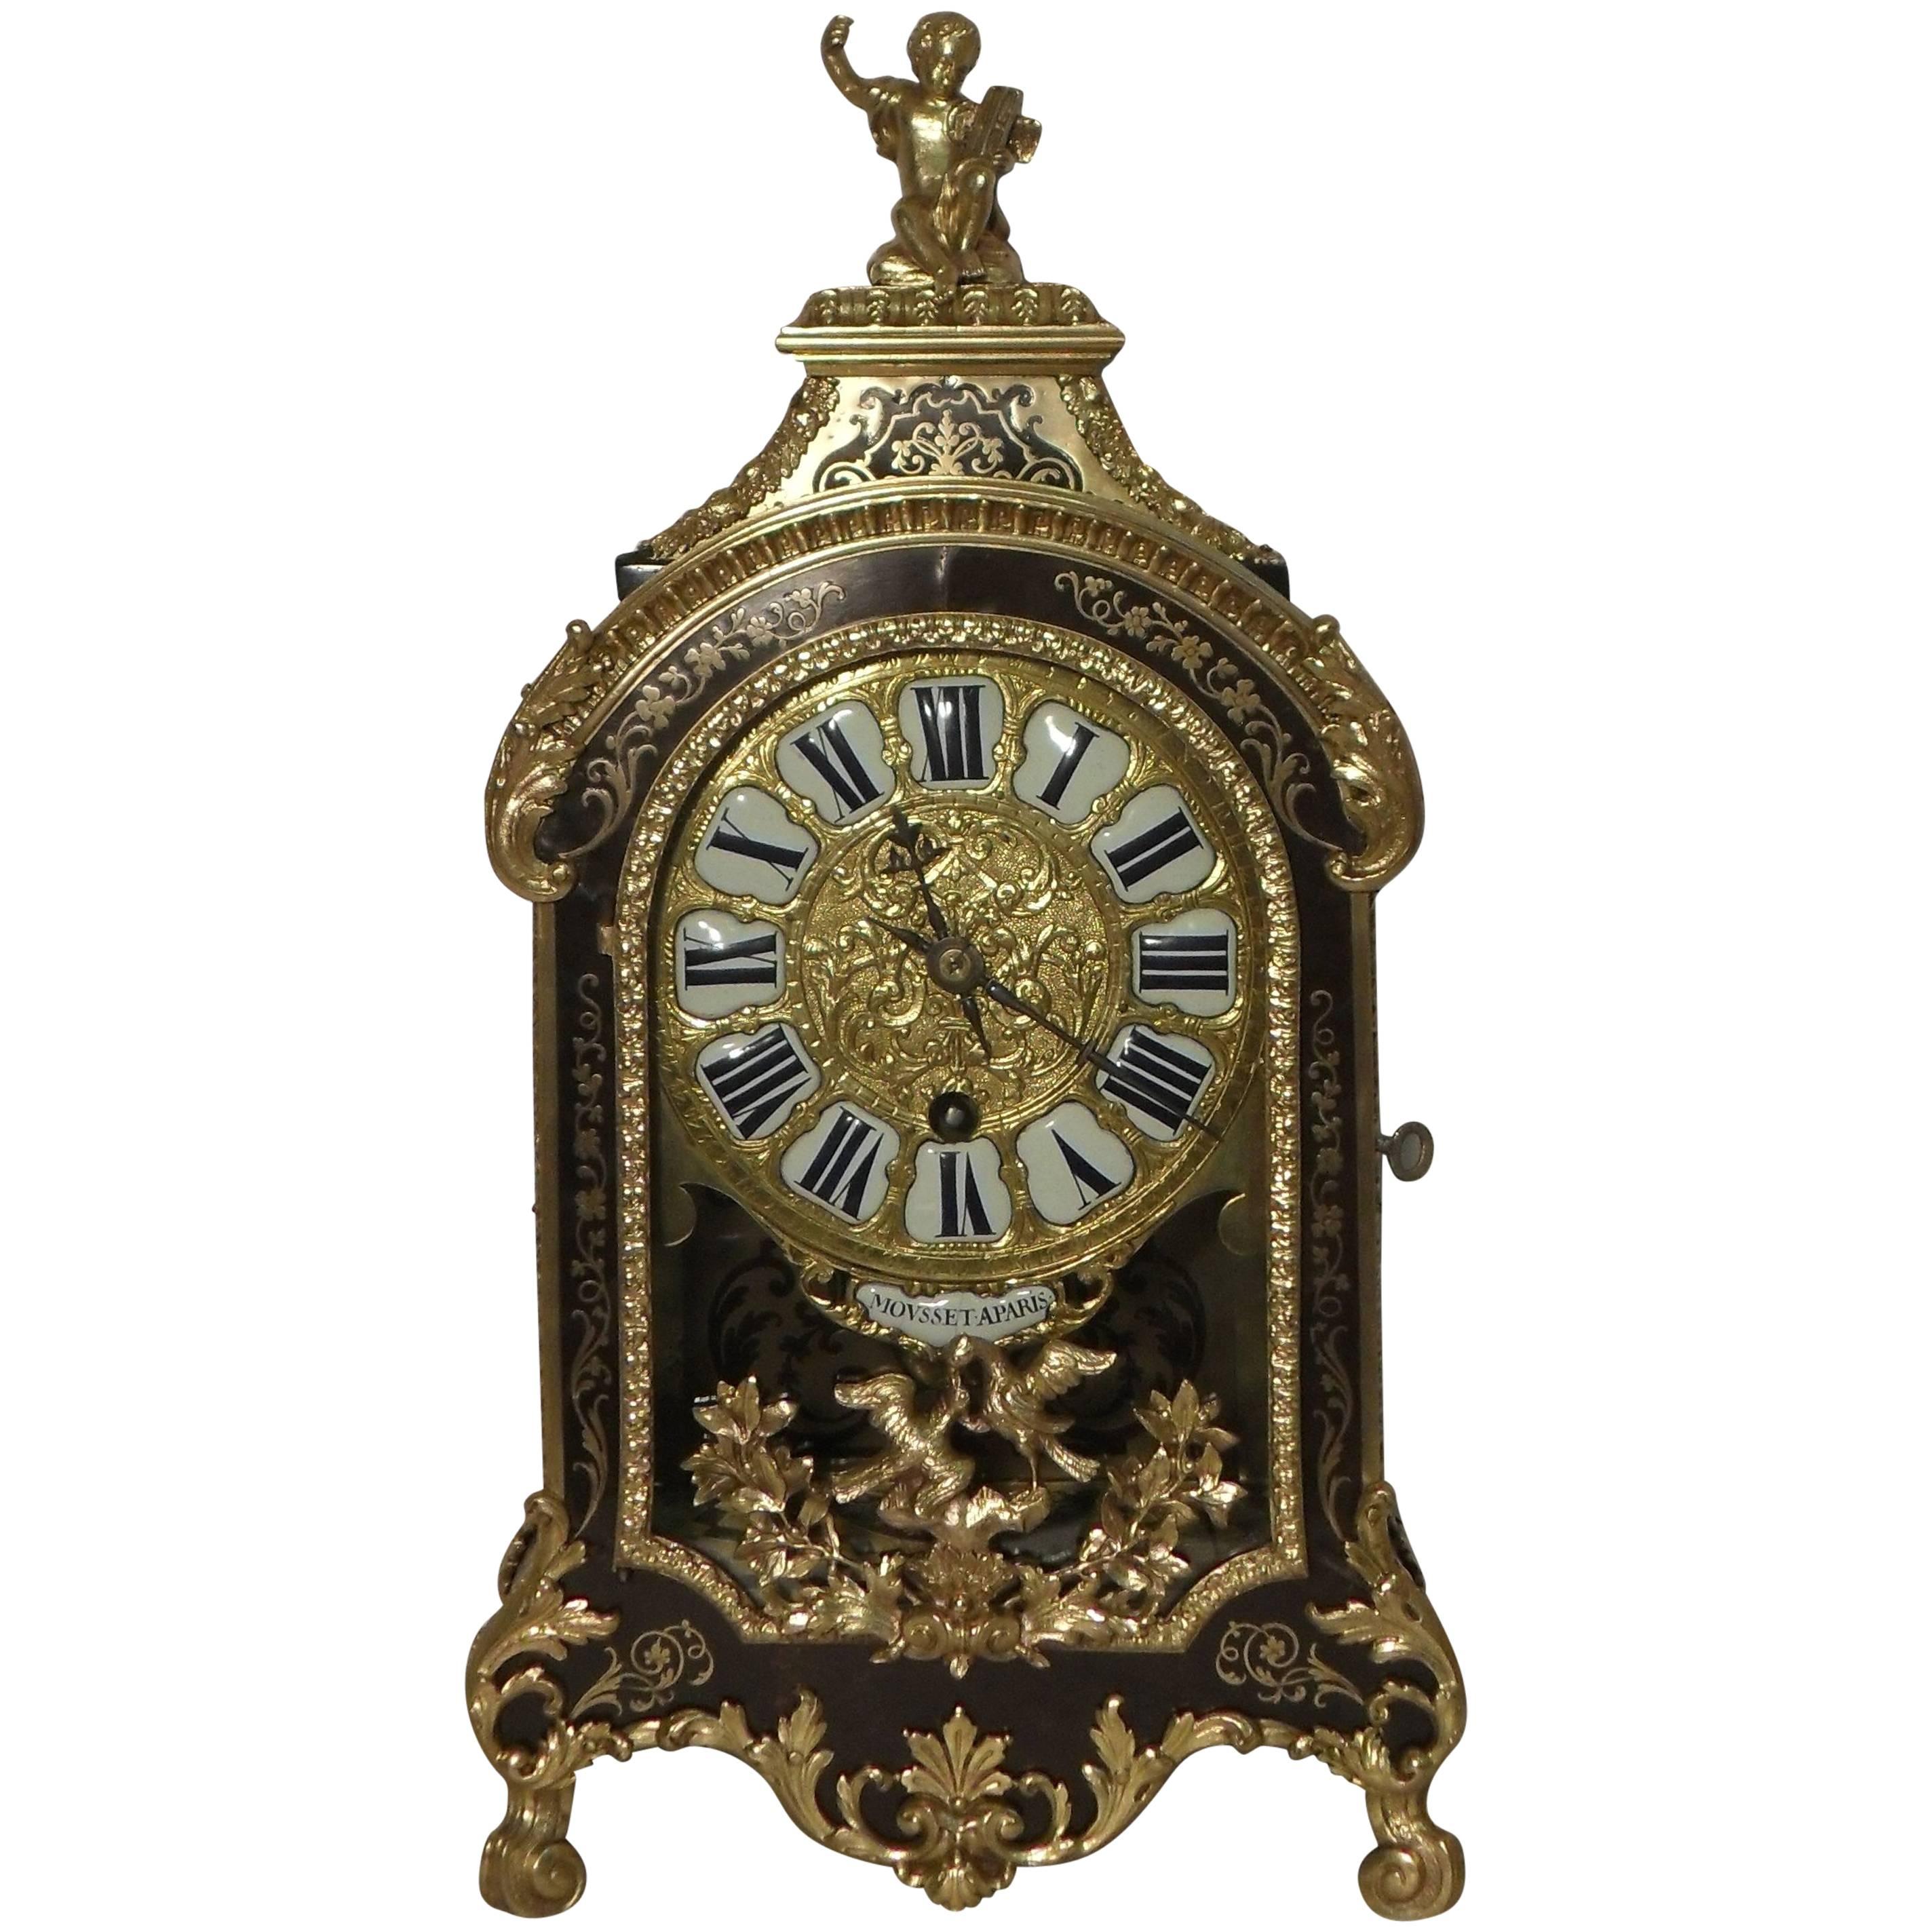 Rare French Louis XV Boulle Bracket Clock with Verge Escapement